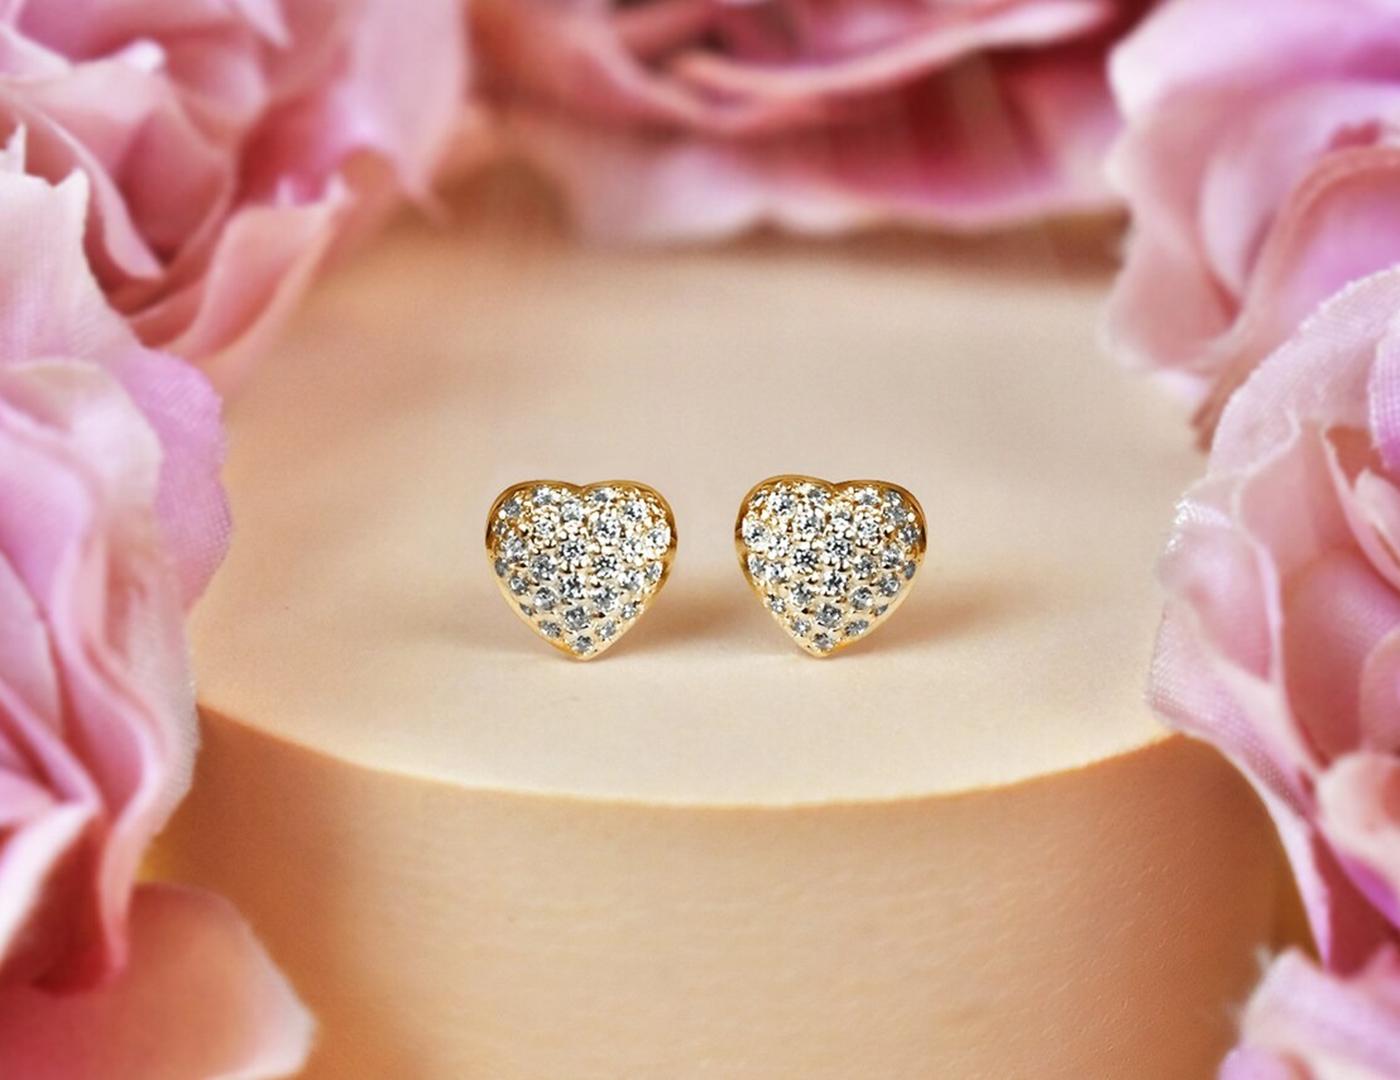 Heart Shaped Diamond Earrings in 18k Rose Gold, Yellow Gold, White Gold.

These Dainty Stud Earrings are made of 18k solid gold featuring shiny brilliant round cut natural diamonds set by master setter in our studio. Simple but unique, elegant and